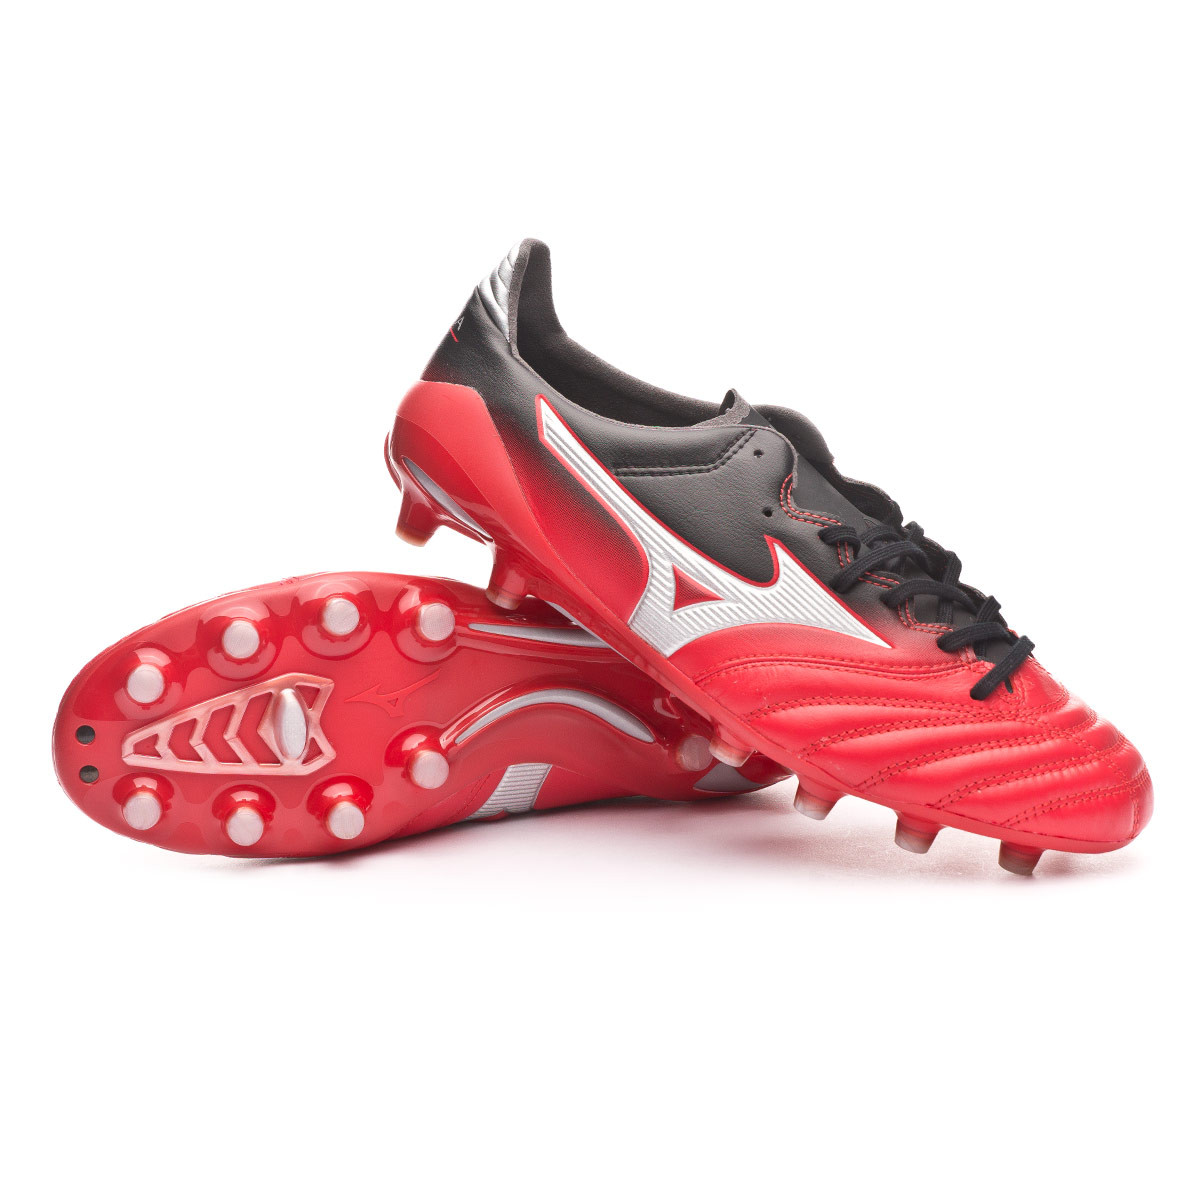 Football Boots Mizuno Morelia Neo Ii Md Chinese Red Silver Black